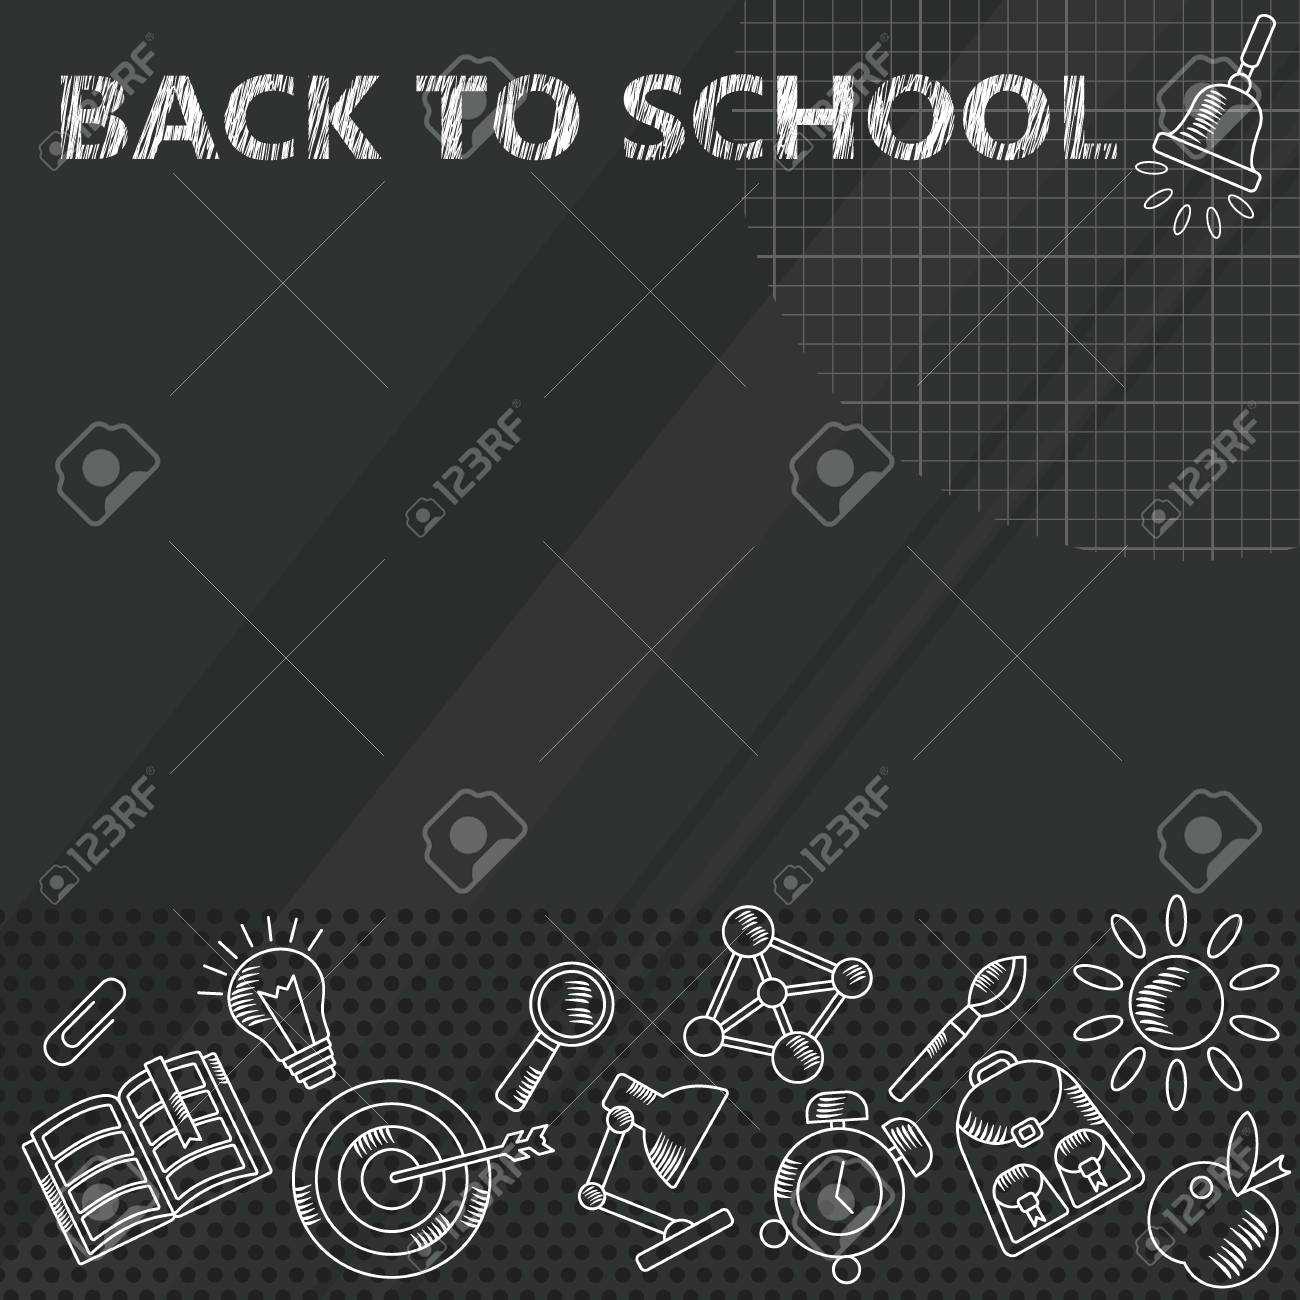 Back To School. Whiteboard In Classroom Poster And Banner Template.. Inside Classroom Banner Template